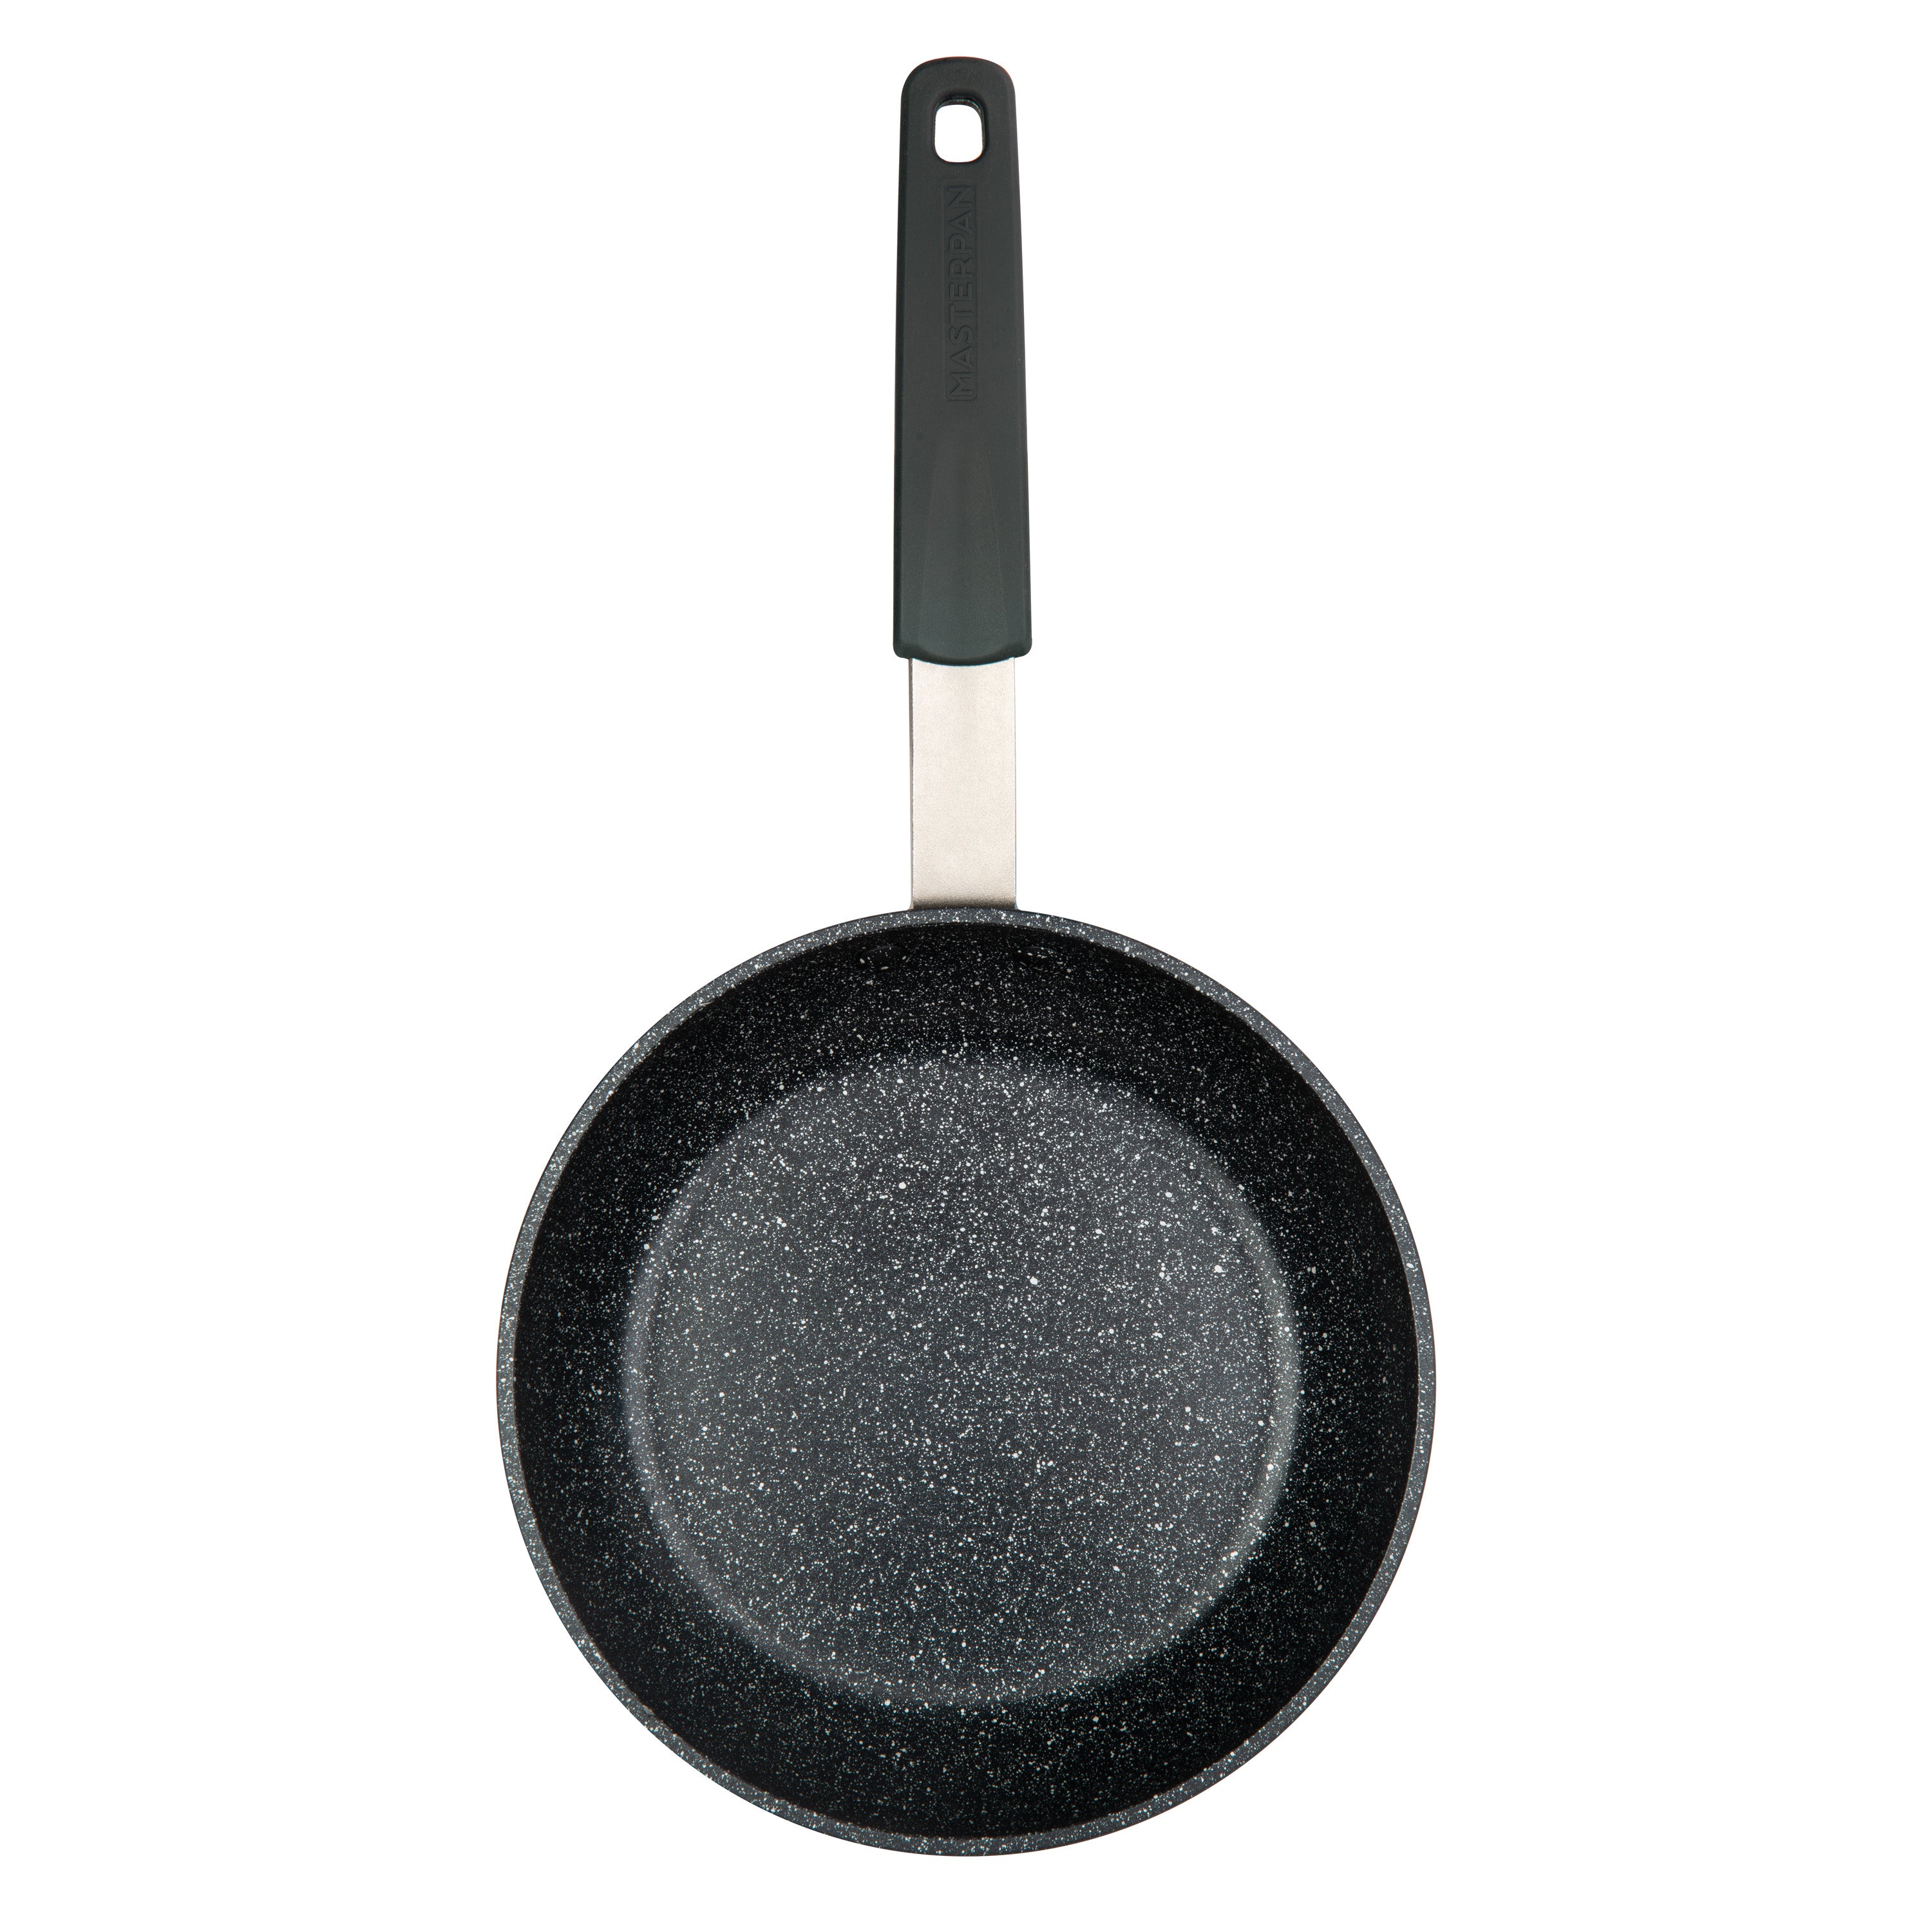 MASTERPAN Nonstick Frypan & Skilletwith Chef's Handle, 9.5